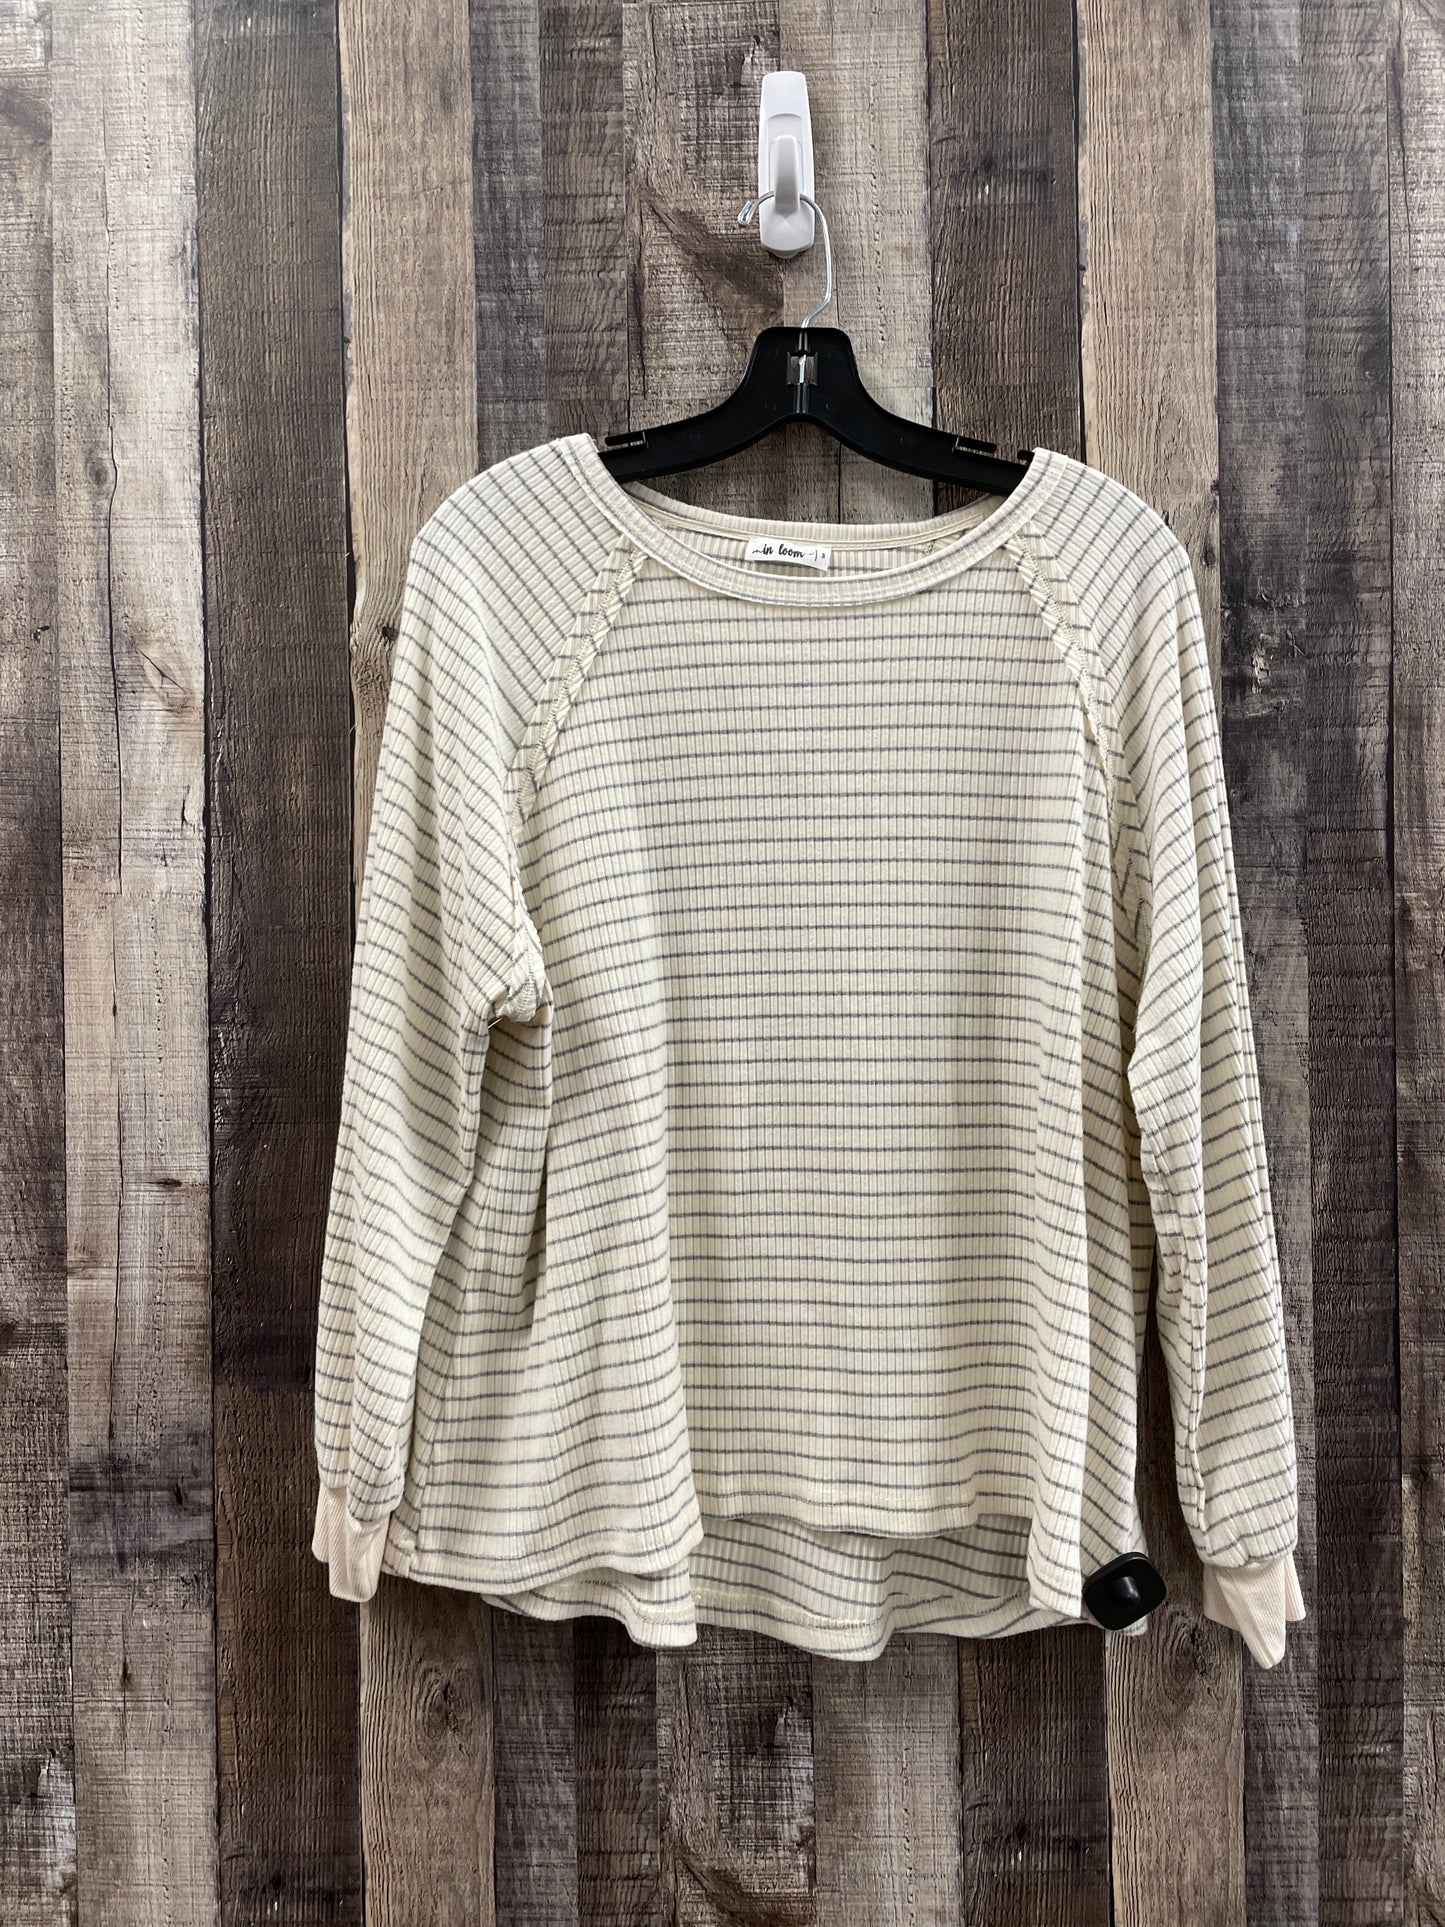 Striped Pattern Top Long Sleeve Basic Cme, Size S